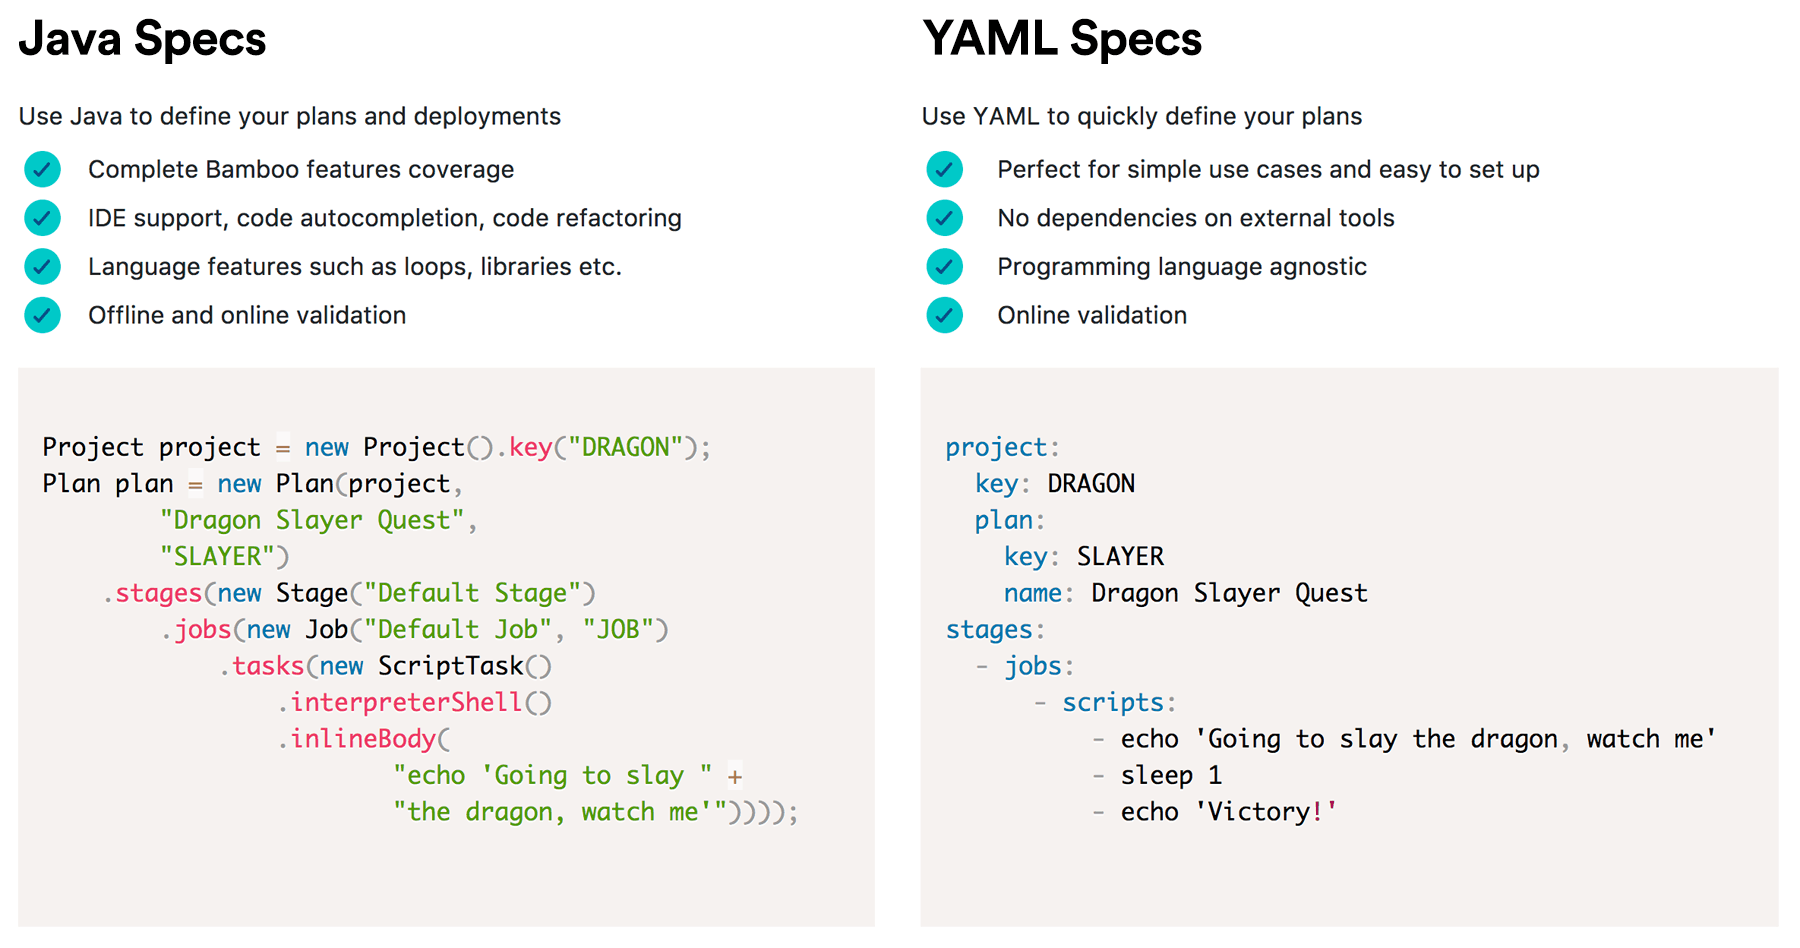 Bamboo build plan spec comparison for Java and YAML